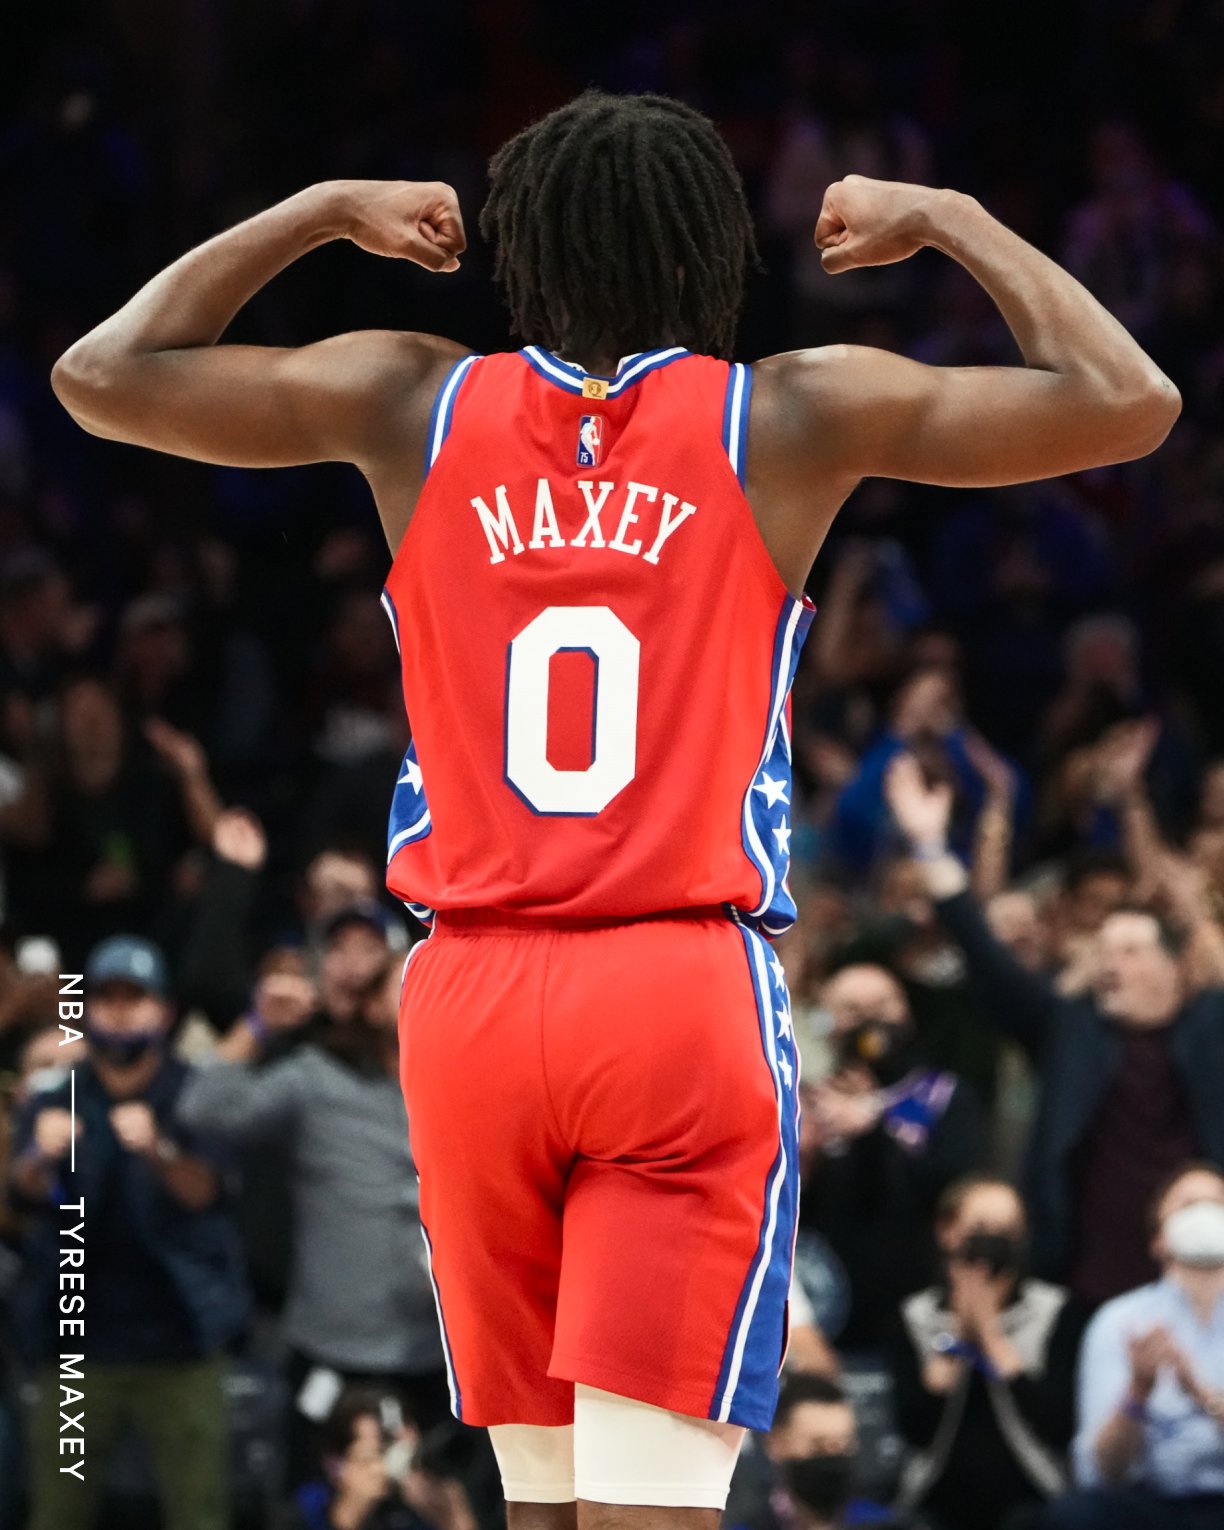 NBACentral on X: Tyrese Maxey over his last 2 games: 33 PTS - 4